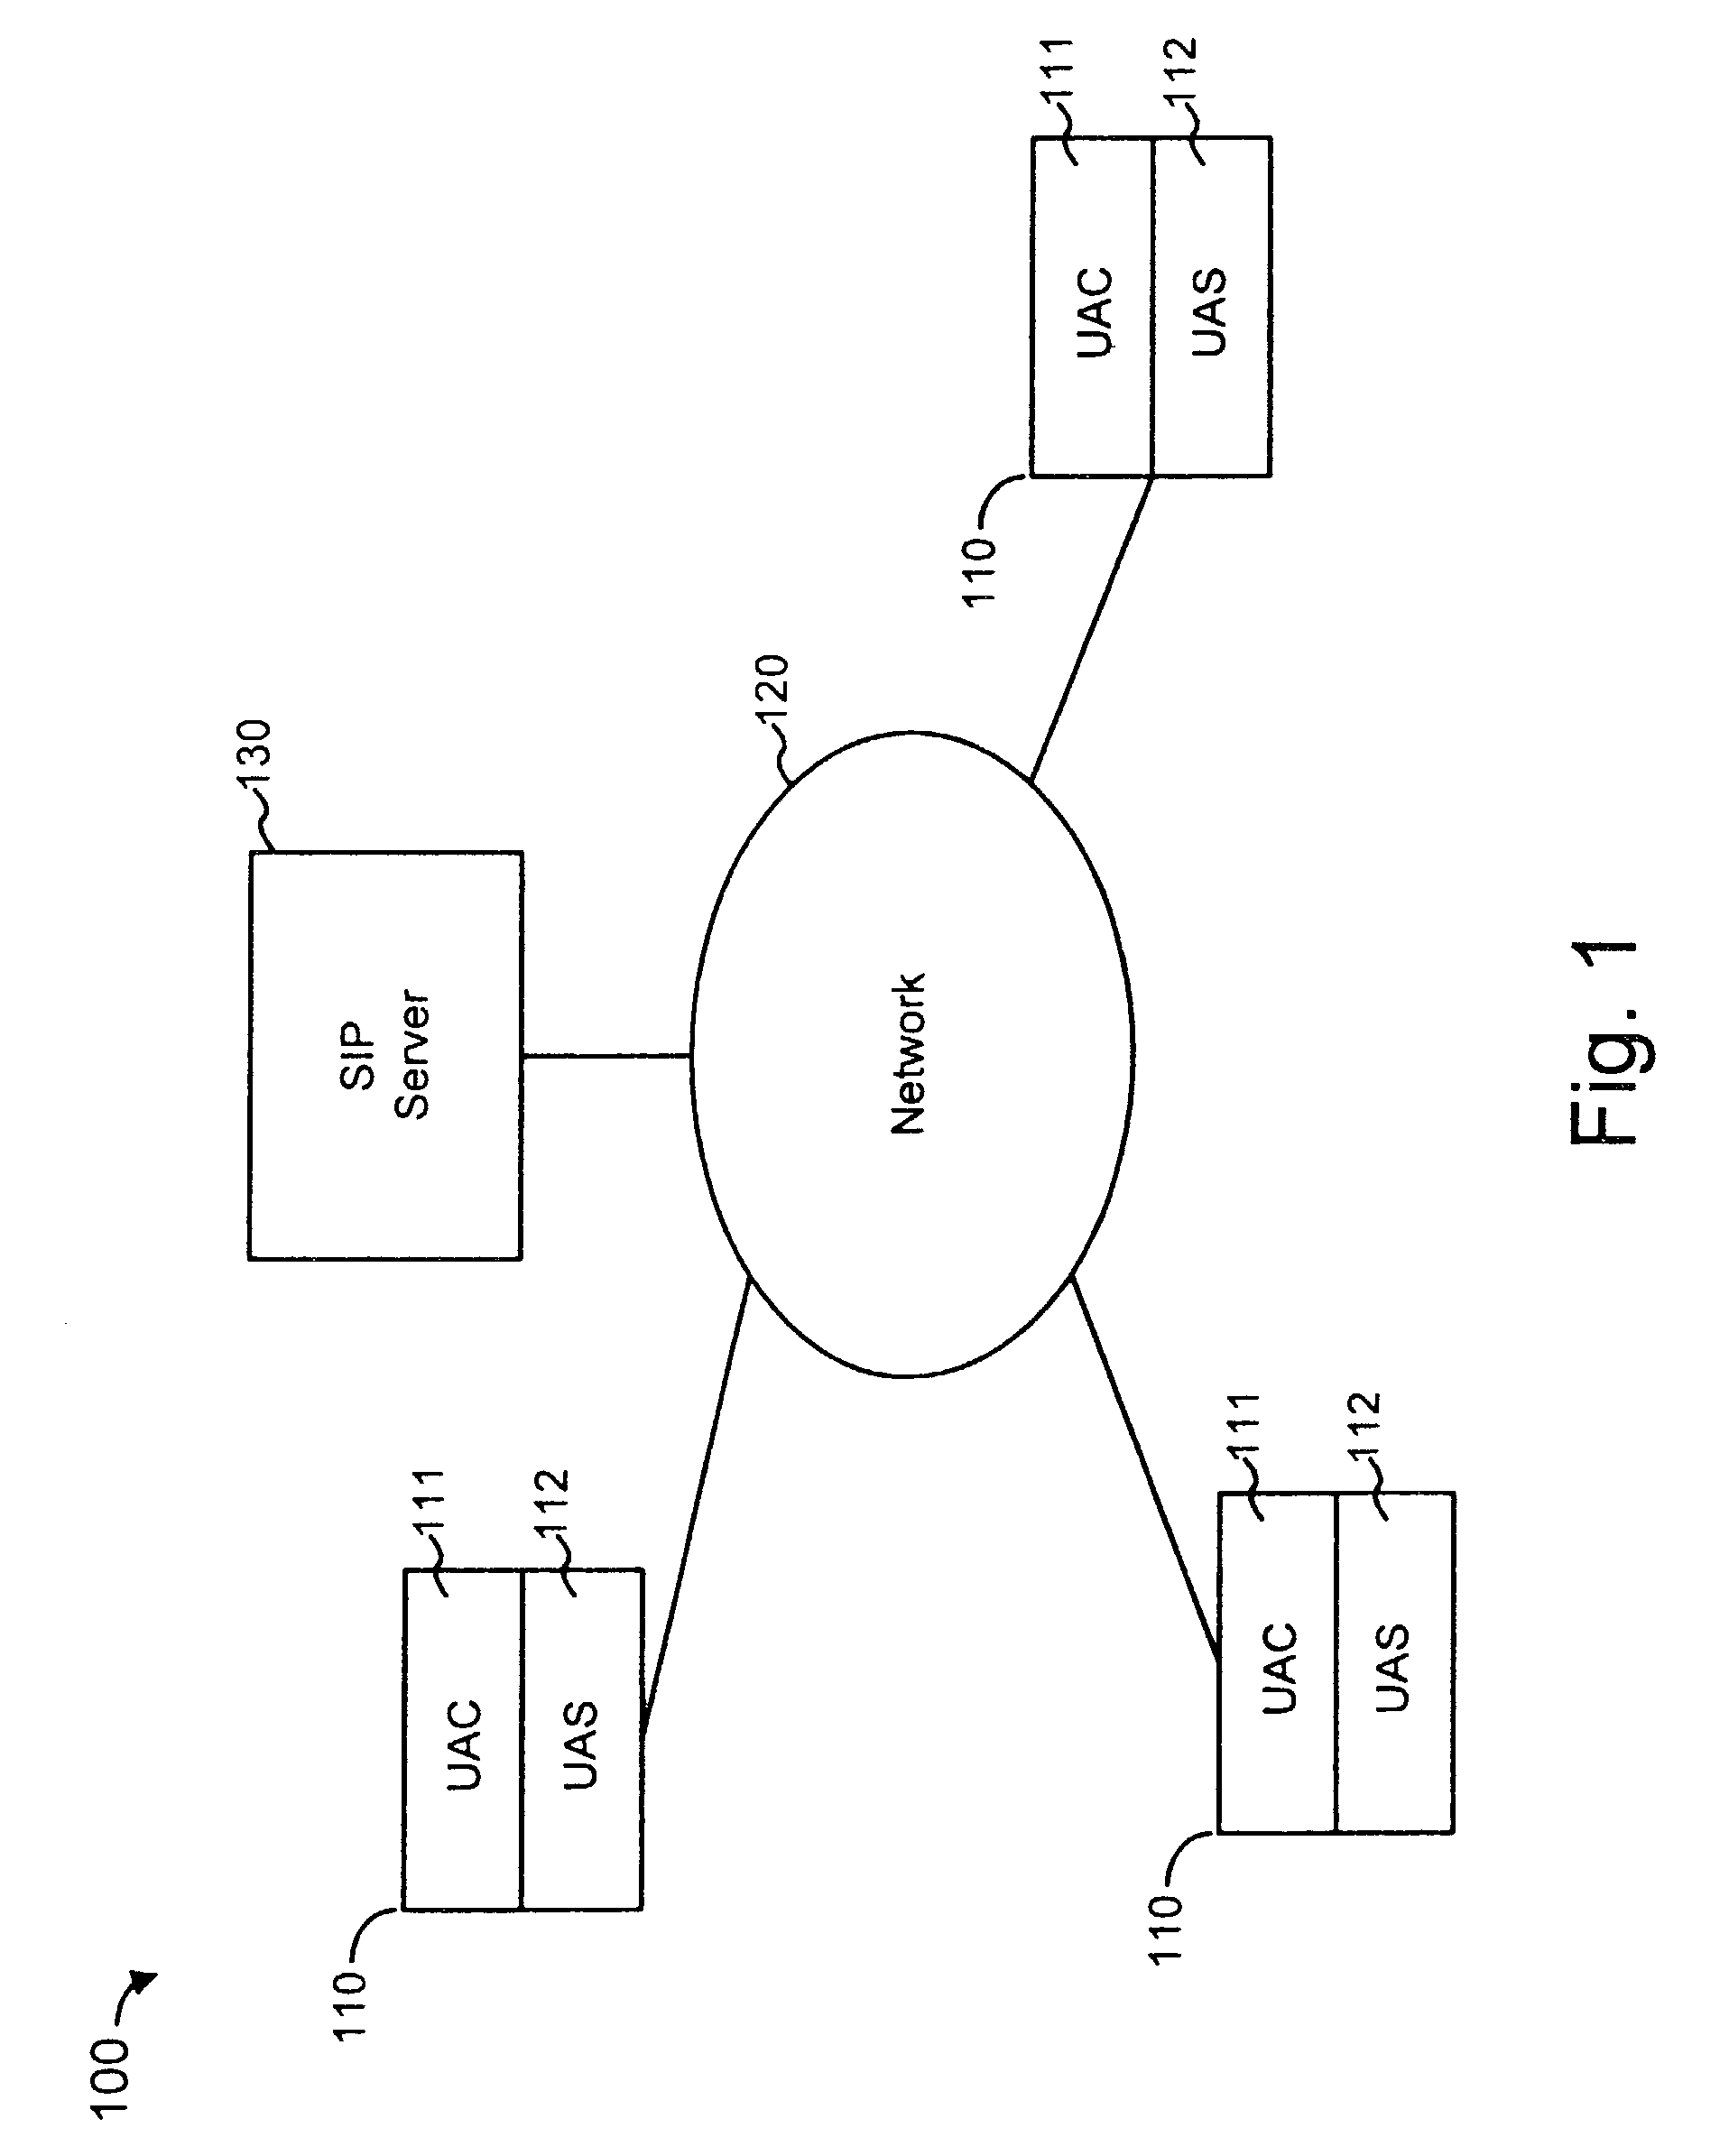 Policy control and billing support for call transfer in a session initiation protocol (SIP) network